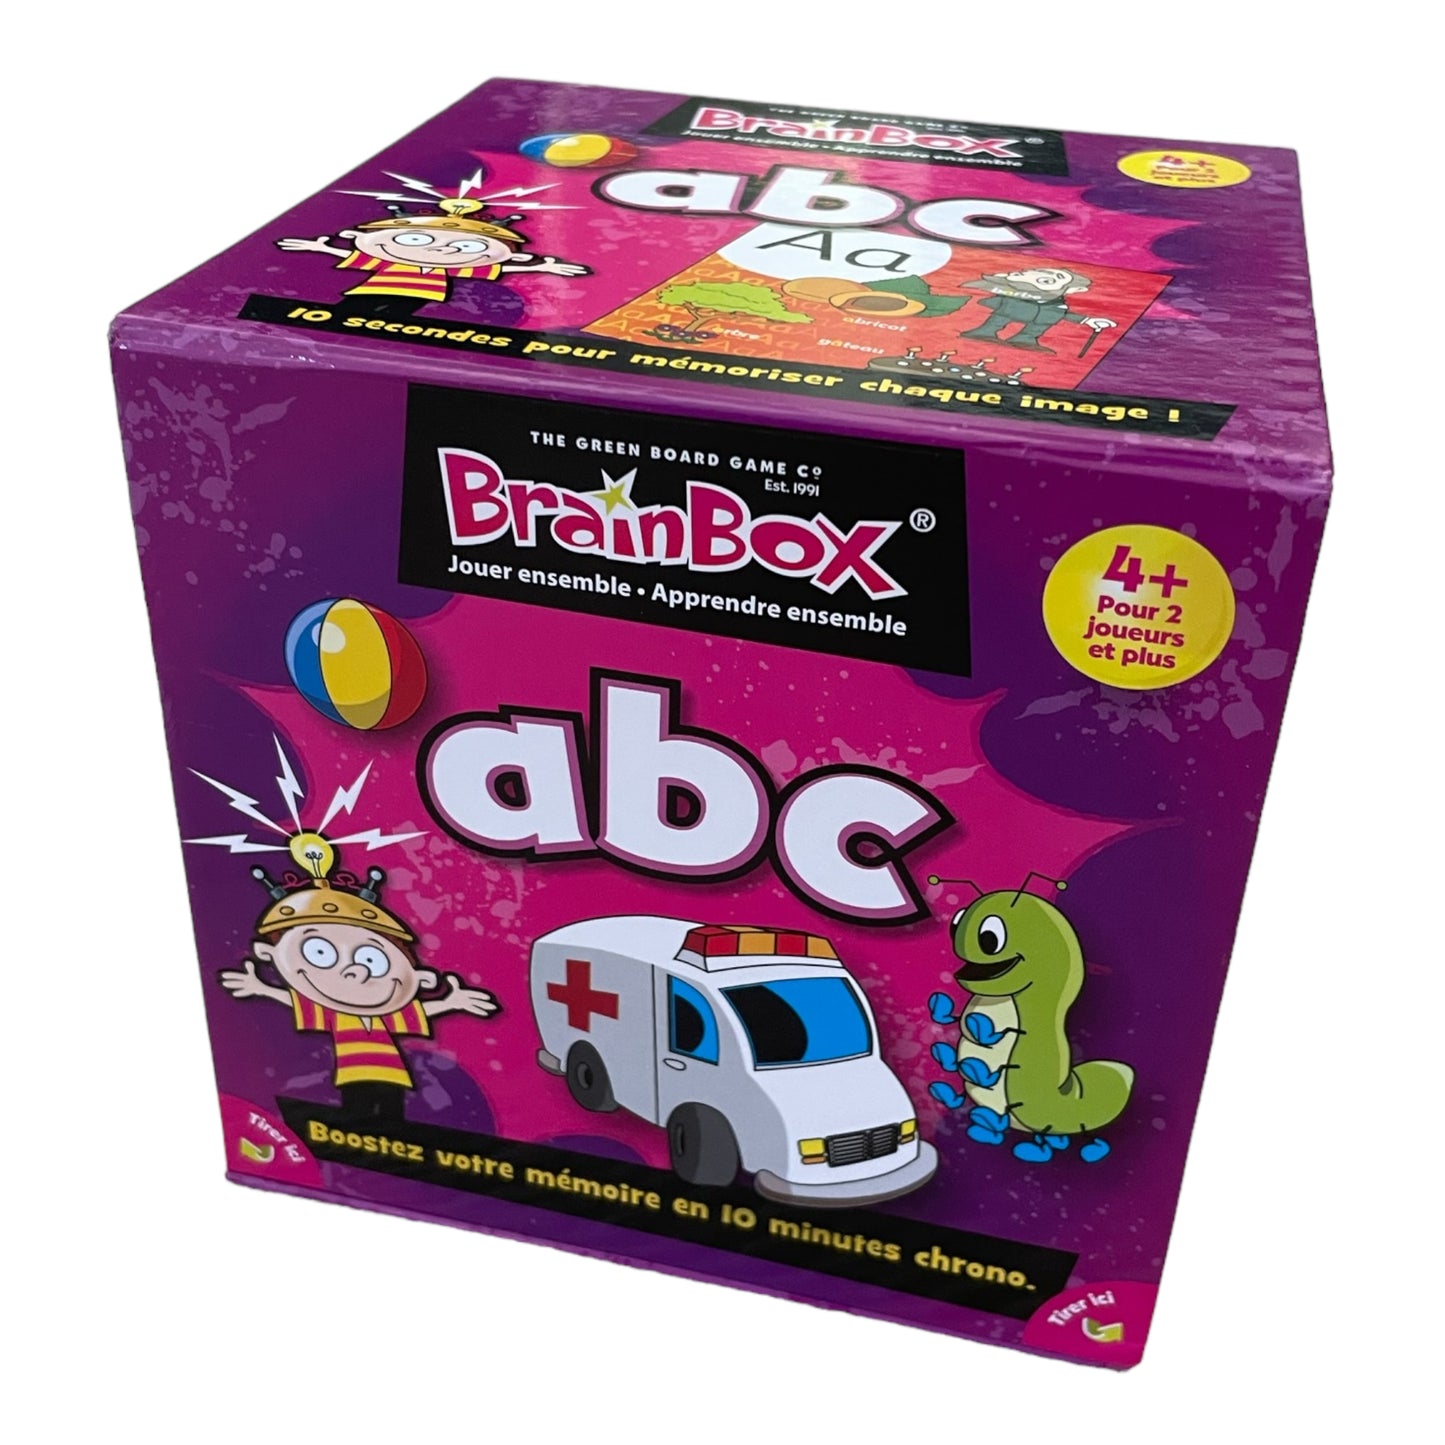 Brainbox - My First ABC -  10 sec to memorize the image - Boost your memory